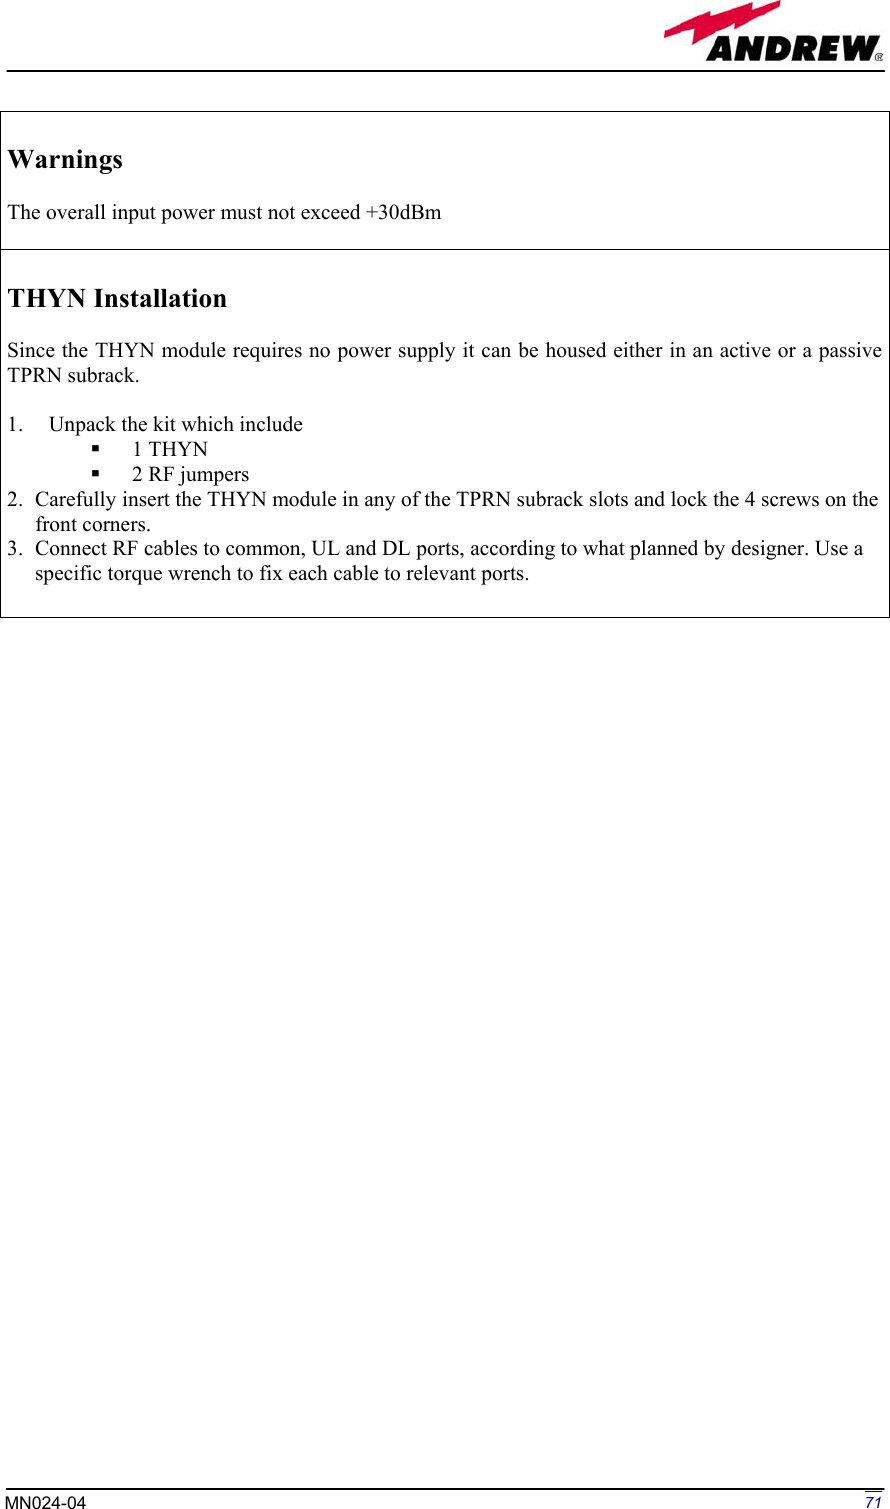 Page 71 of Andrew Wireless Innovations Group BCP-TFAM23 Model TFAM23 Downlink Booster User Manual MN024 04 rev3